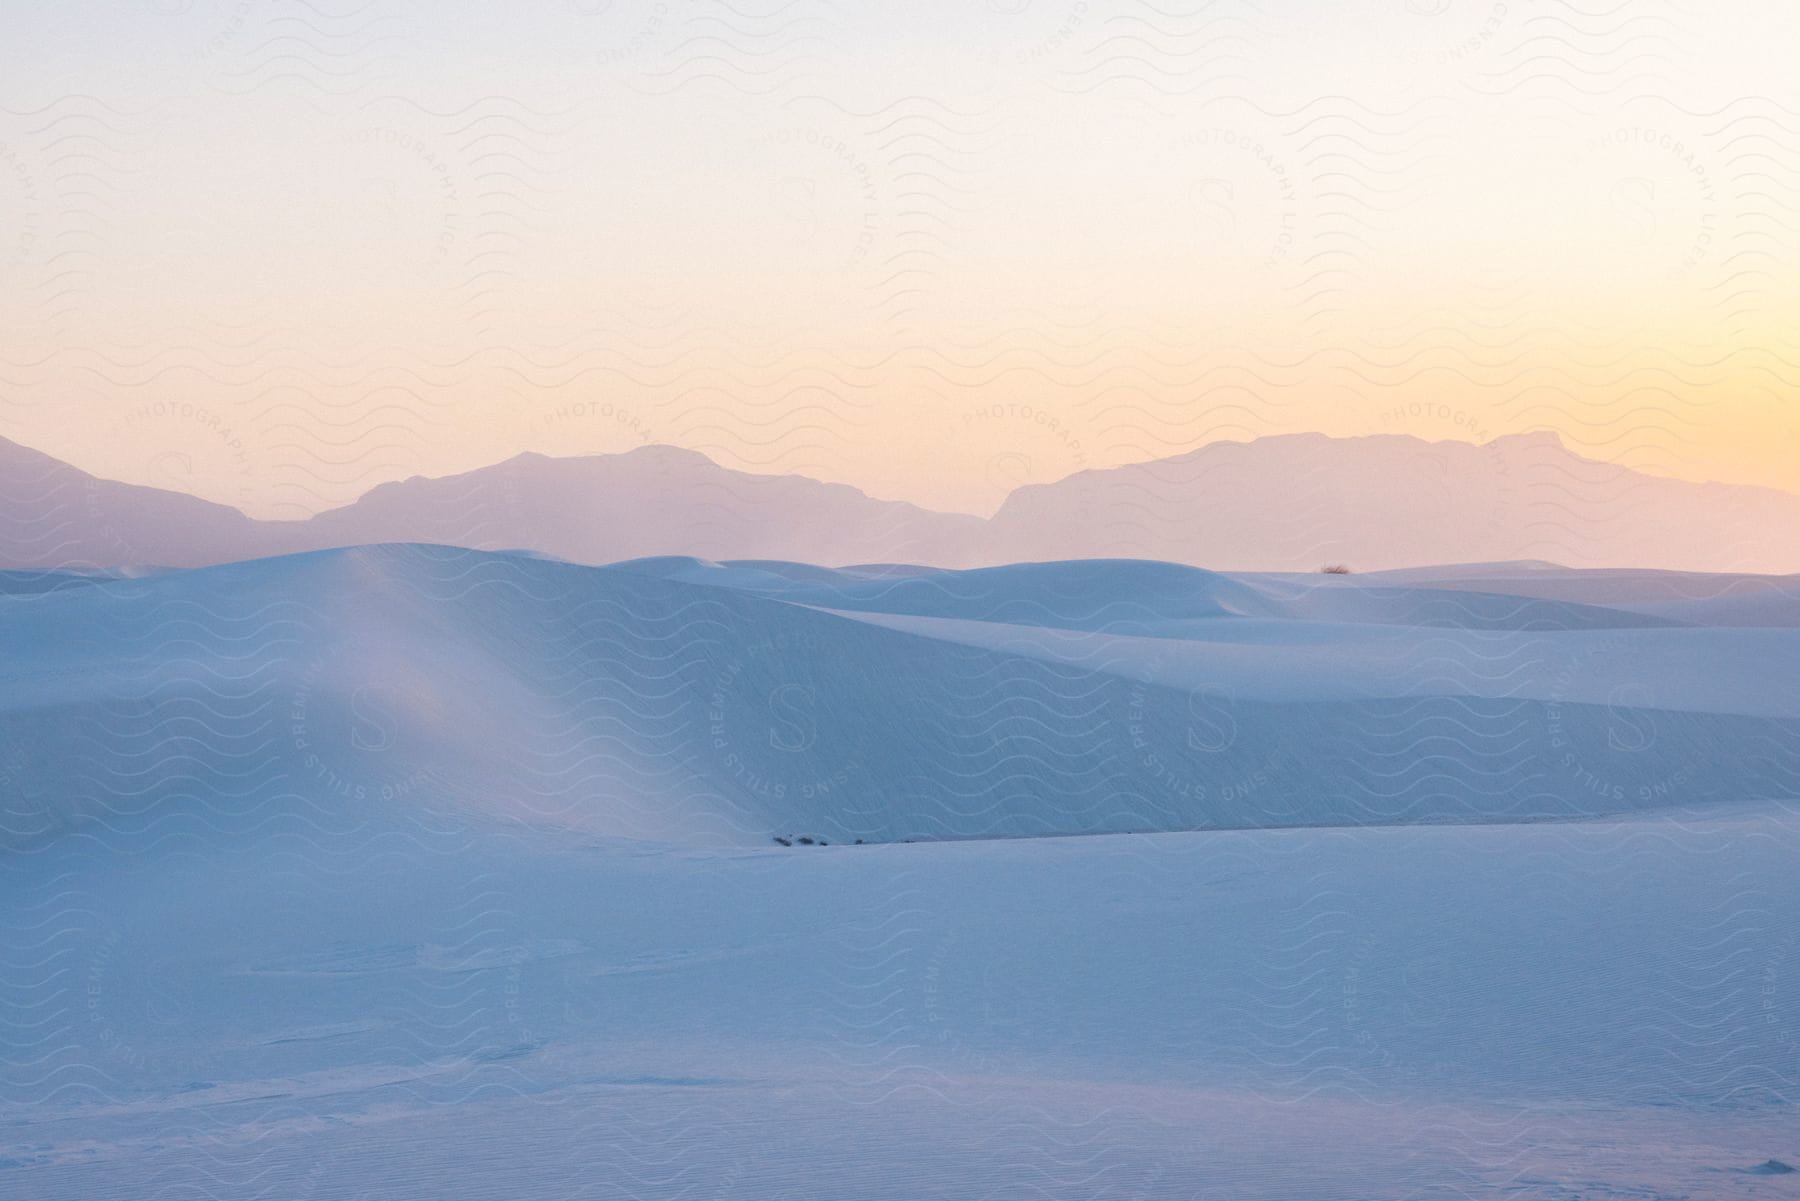 A serene landscape of smooth white sand dunes with distant mountains under a soft gradient sky during sunset